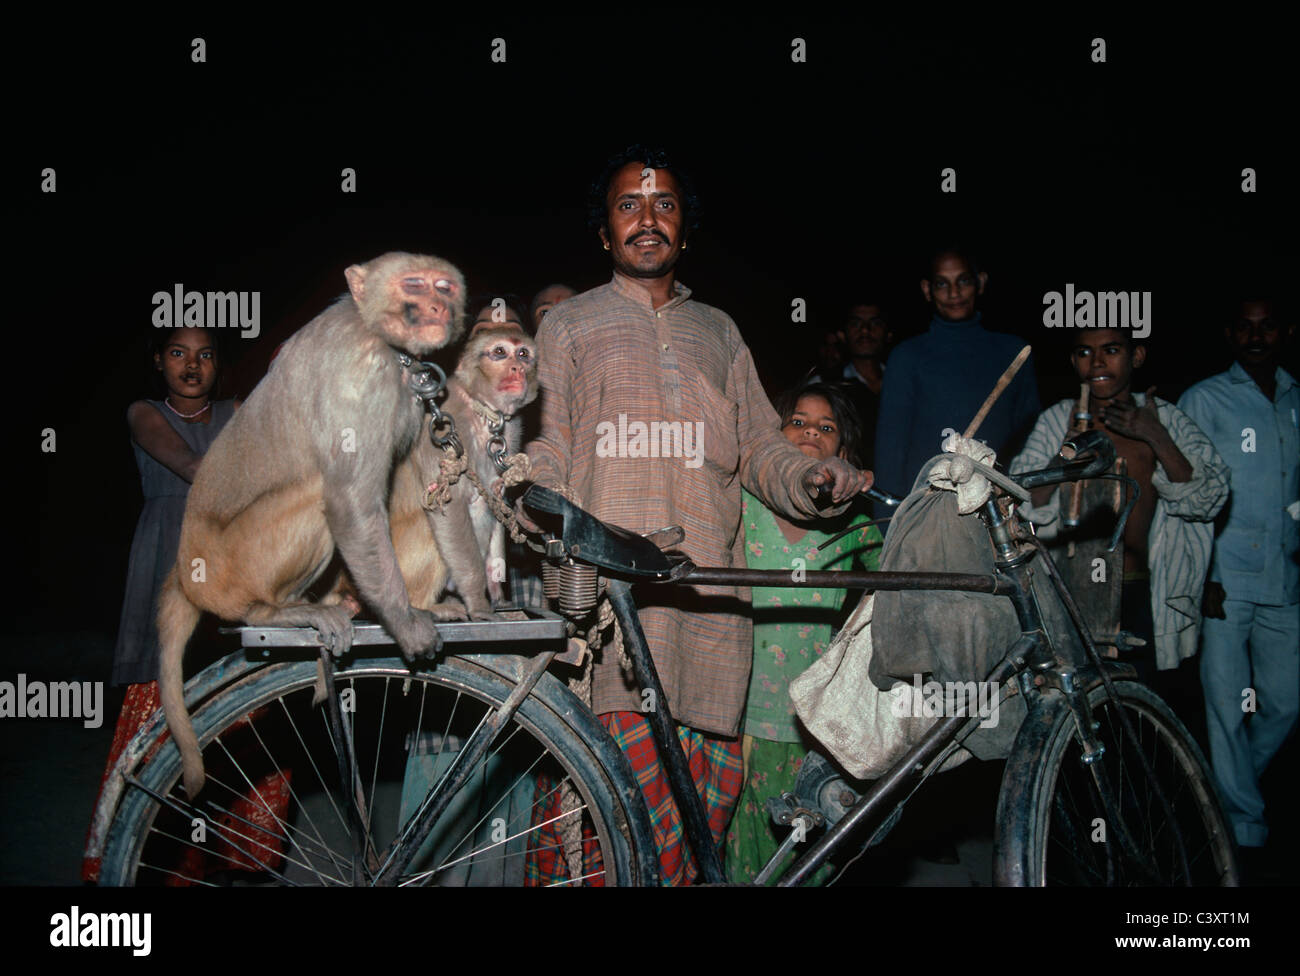 A monkey trainer is about to return home on his bicycle. His two monkeys sit behind the seat. New Delhi, India. Stock Photo